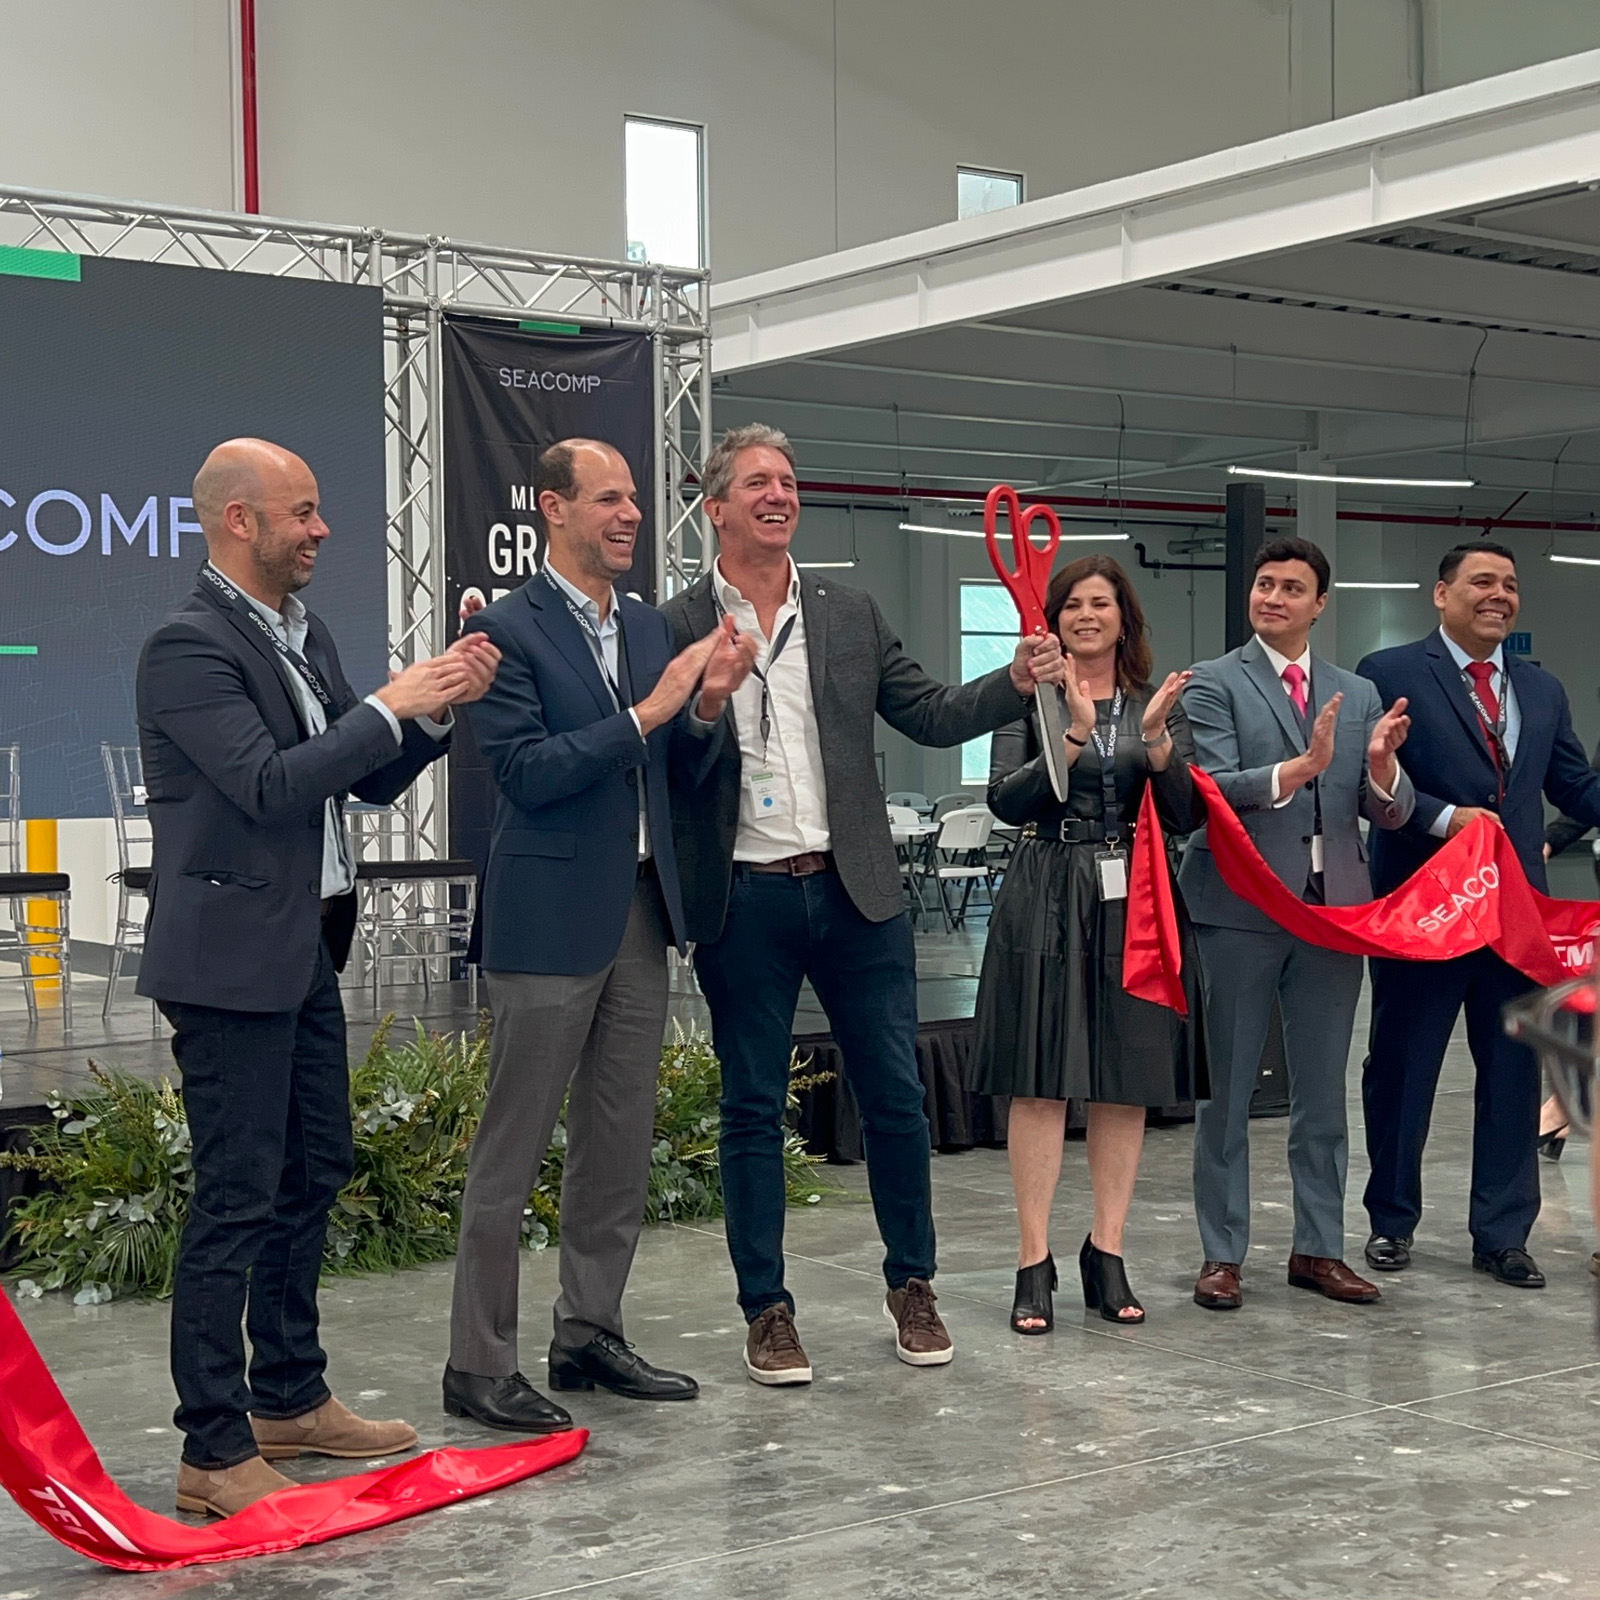 SEACOMP Mexico Ribbon Cutting during Grand Opening Event